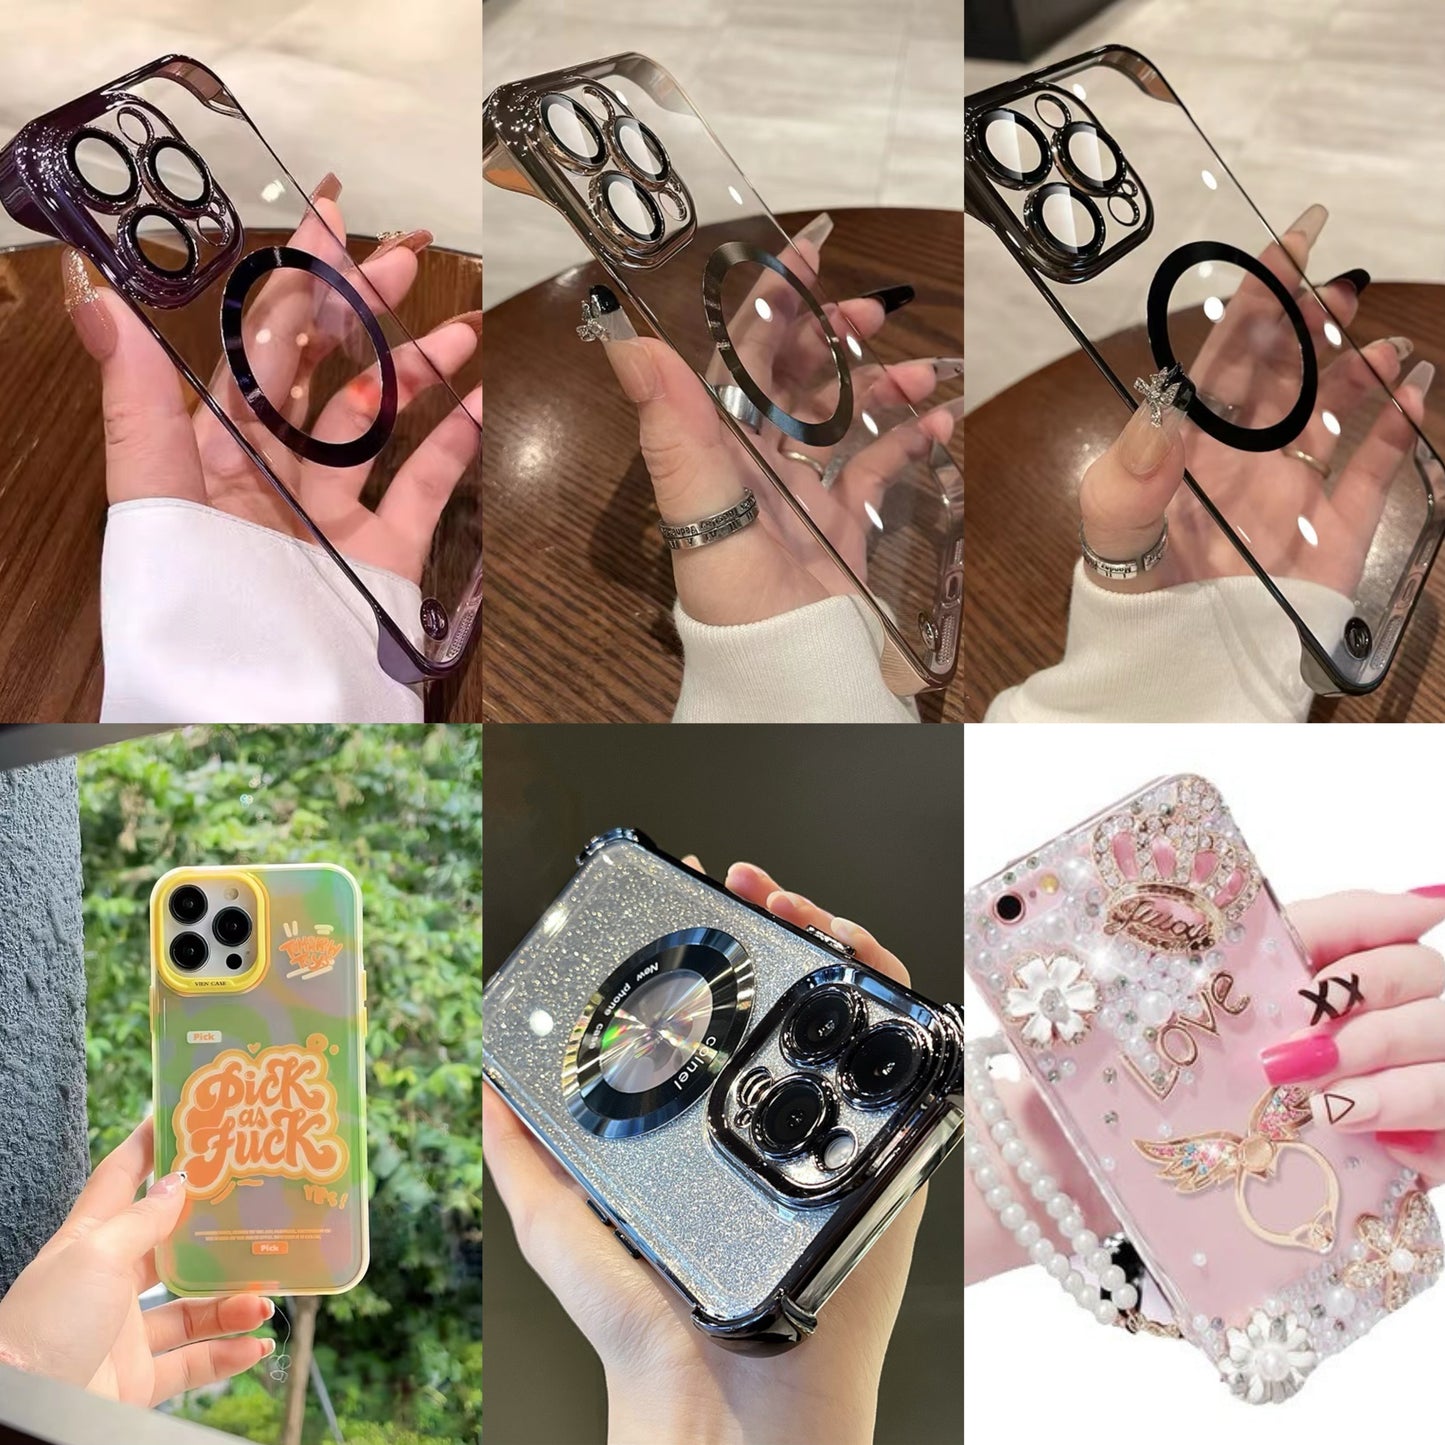 Limited Supplies Random 20 Iphone Cases only for $50!!